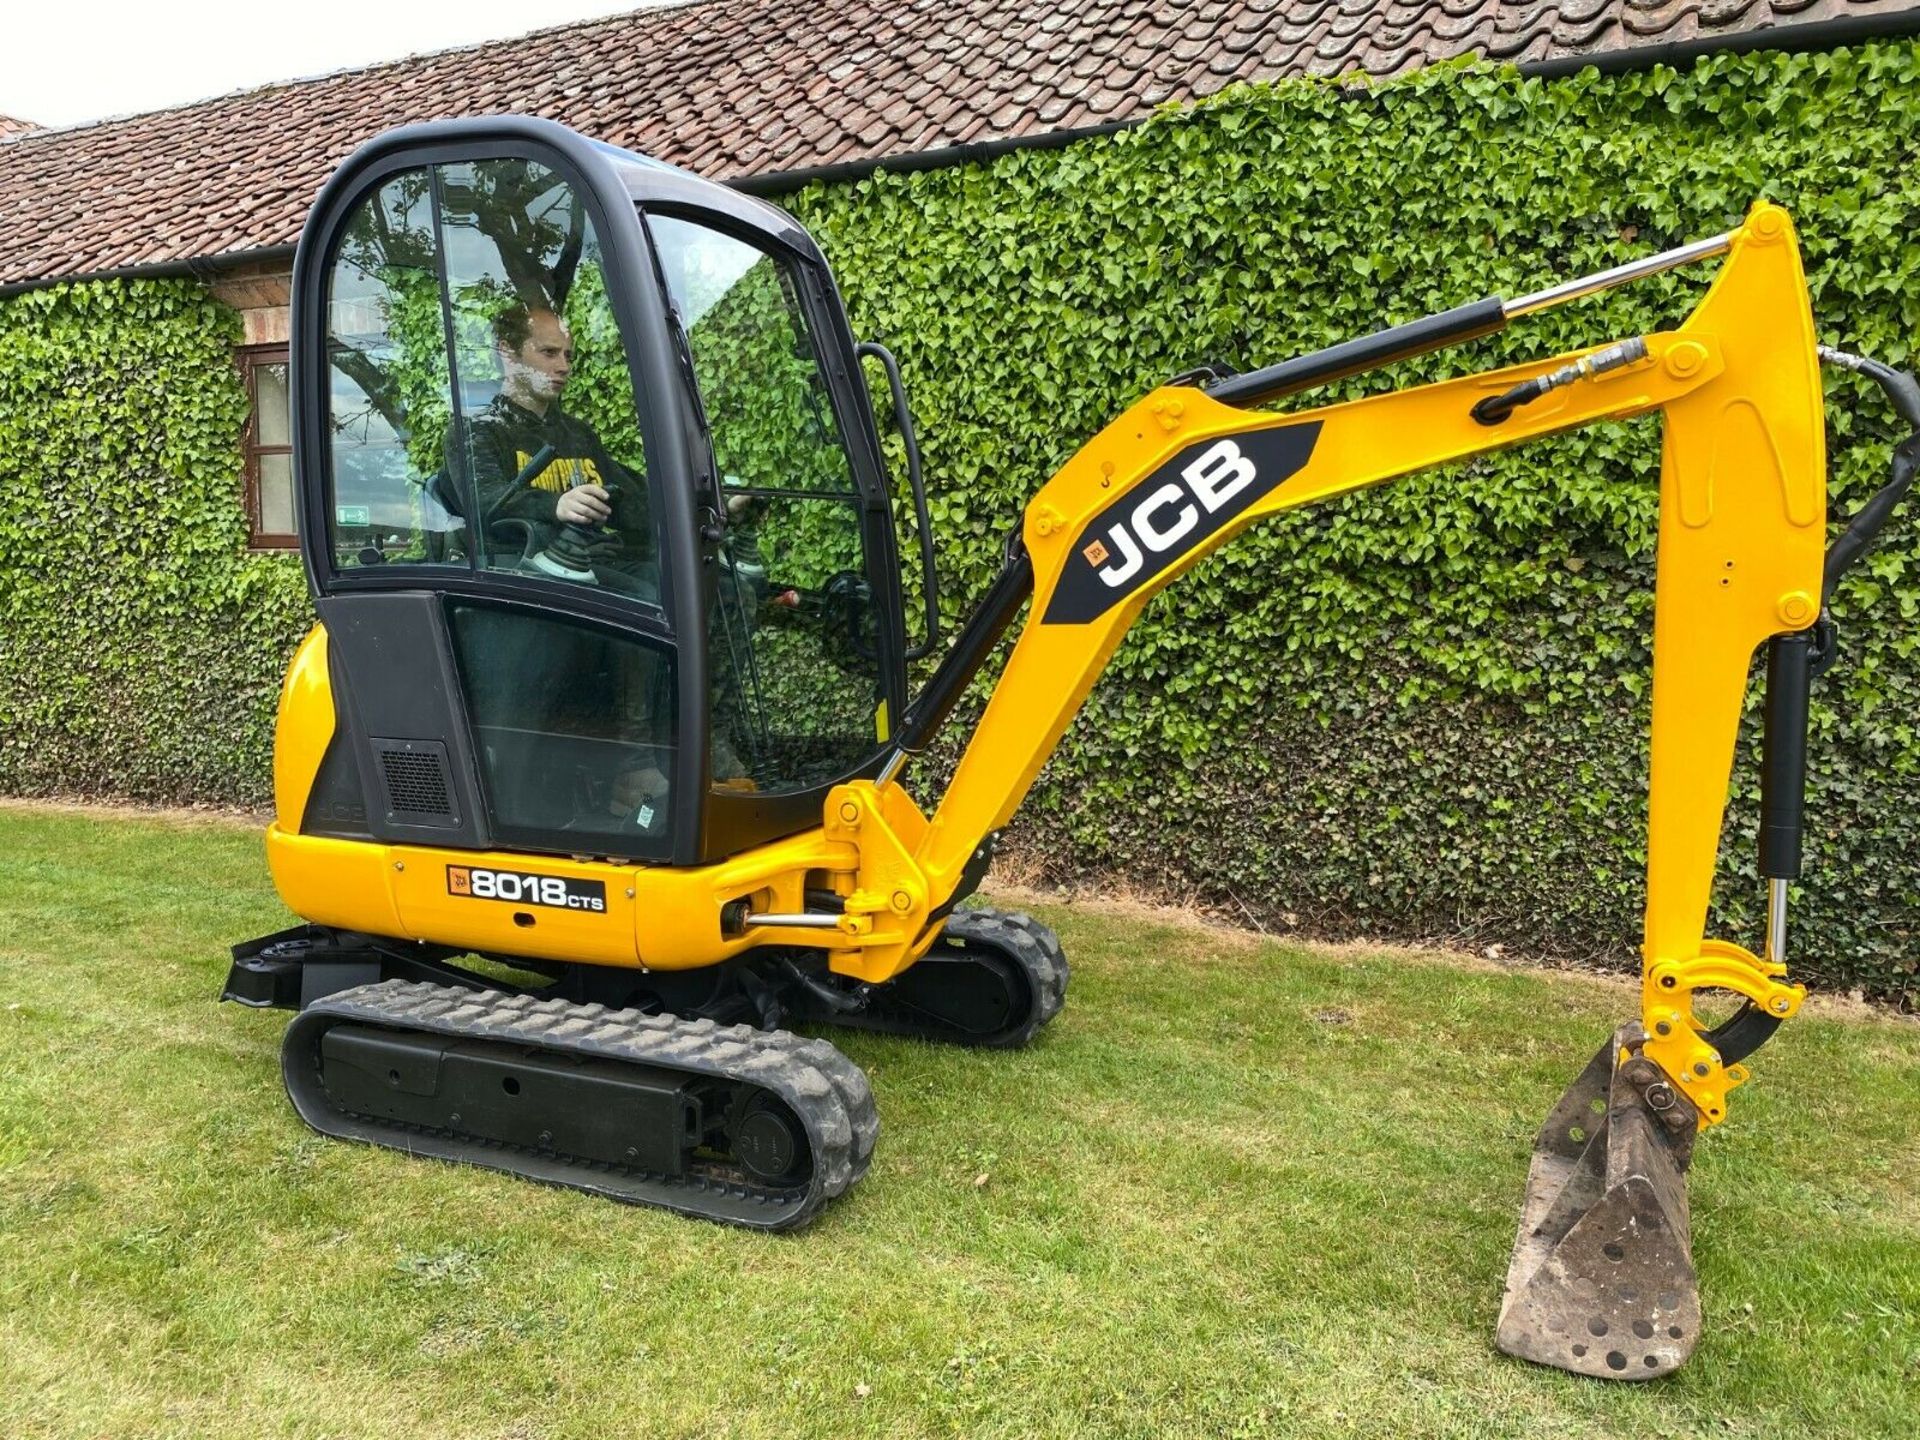 JCB 8018 CTS MINI DIGGER, YEAR 2012, ONLY 1680 HOURS, C/W 3 BUCKETS, EXPANDING TRACKS, QUICK HITCH - Image 3 of 11